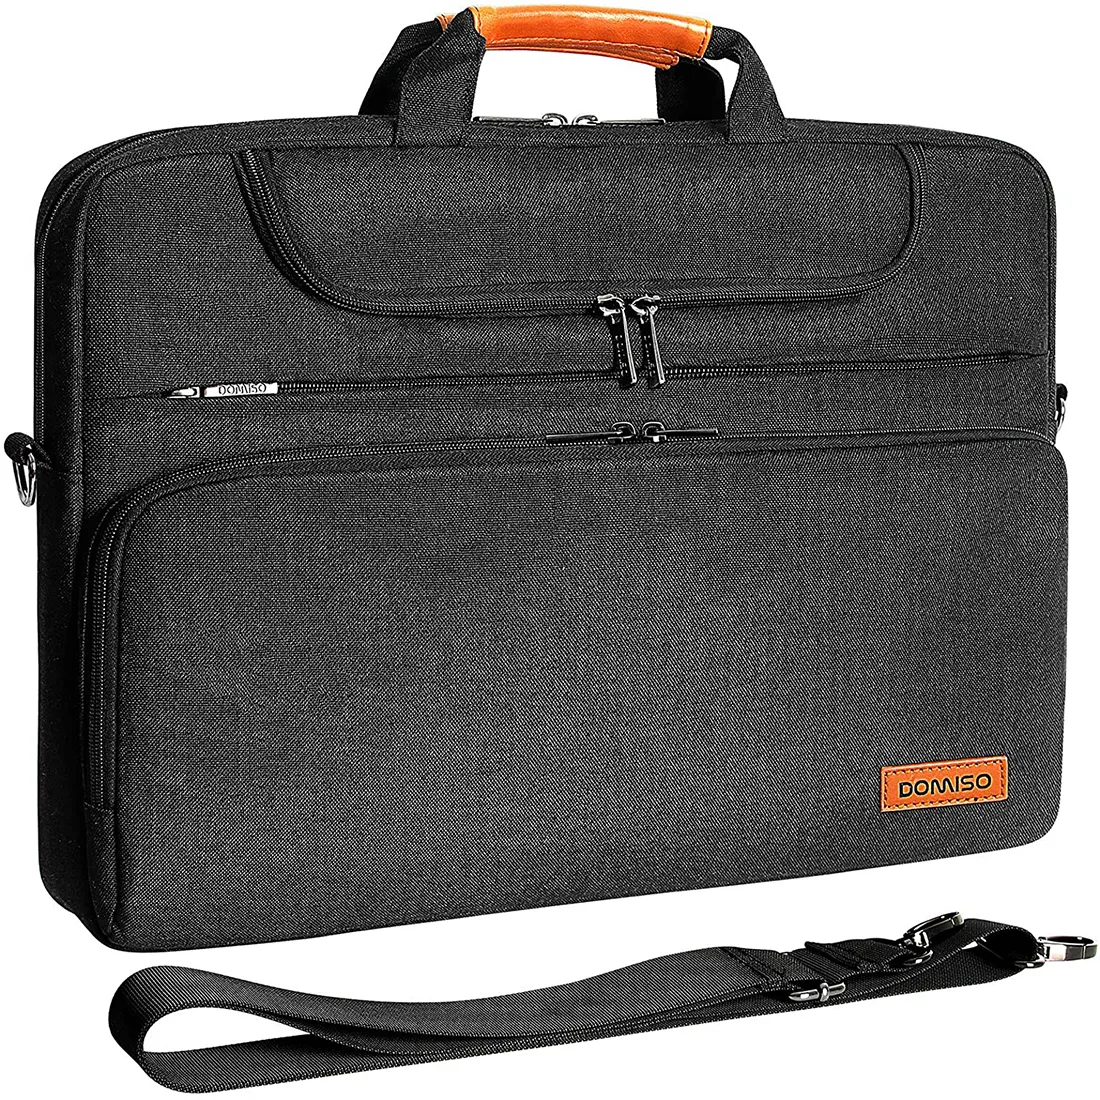 Multi-Use Laptop Briefcase With Shoulder Strap - Fits 10